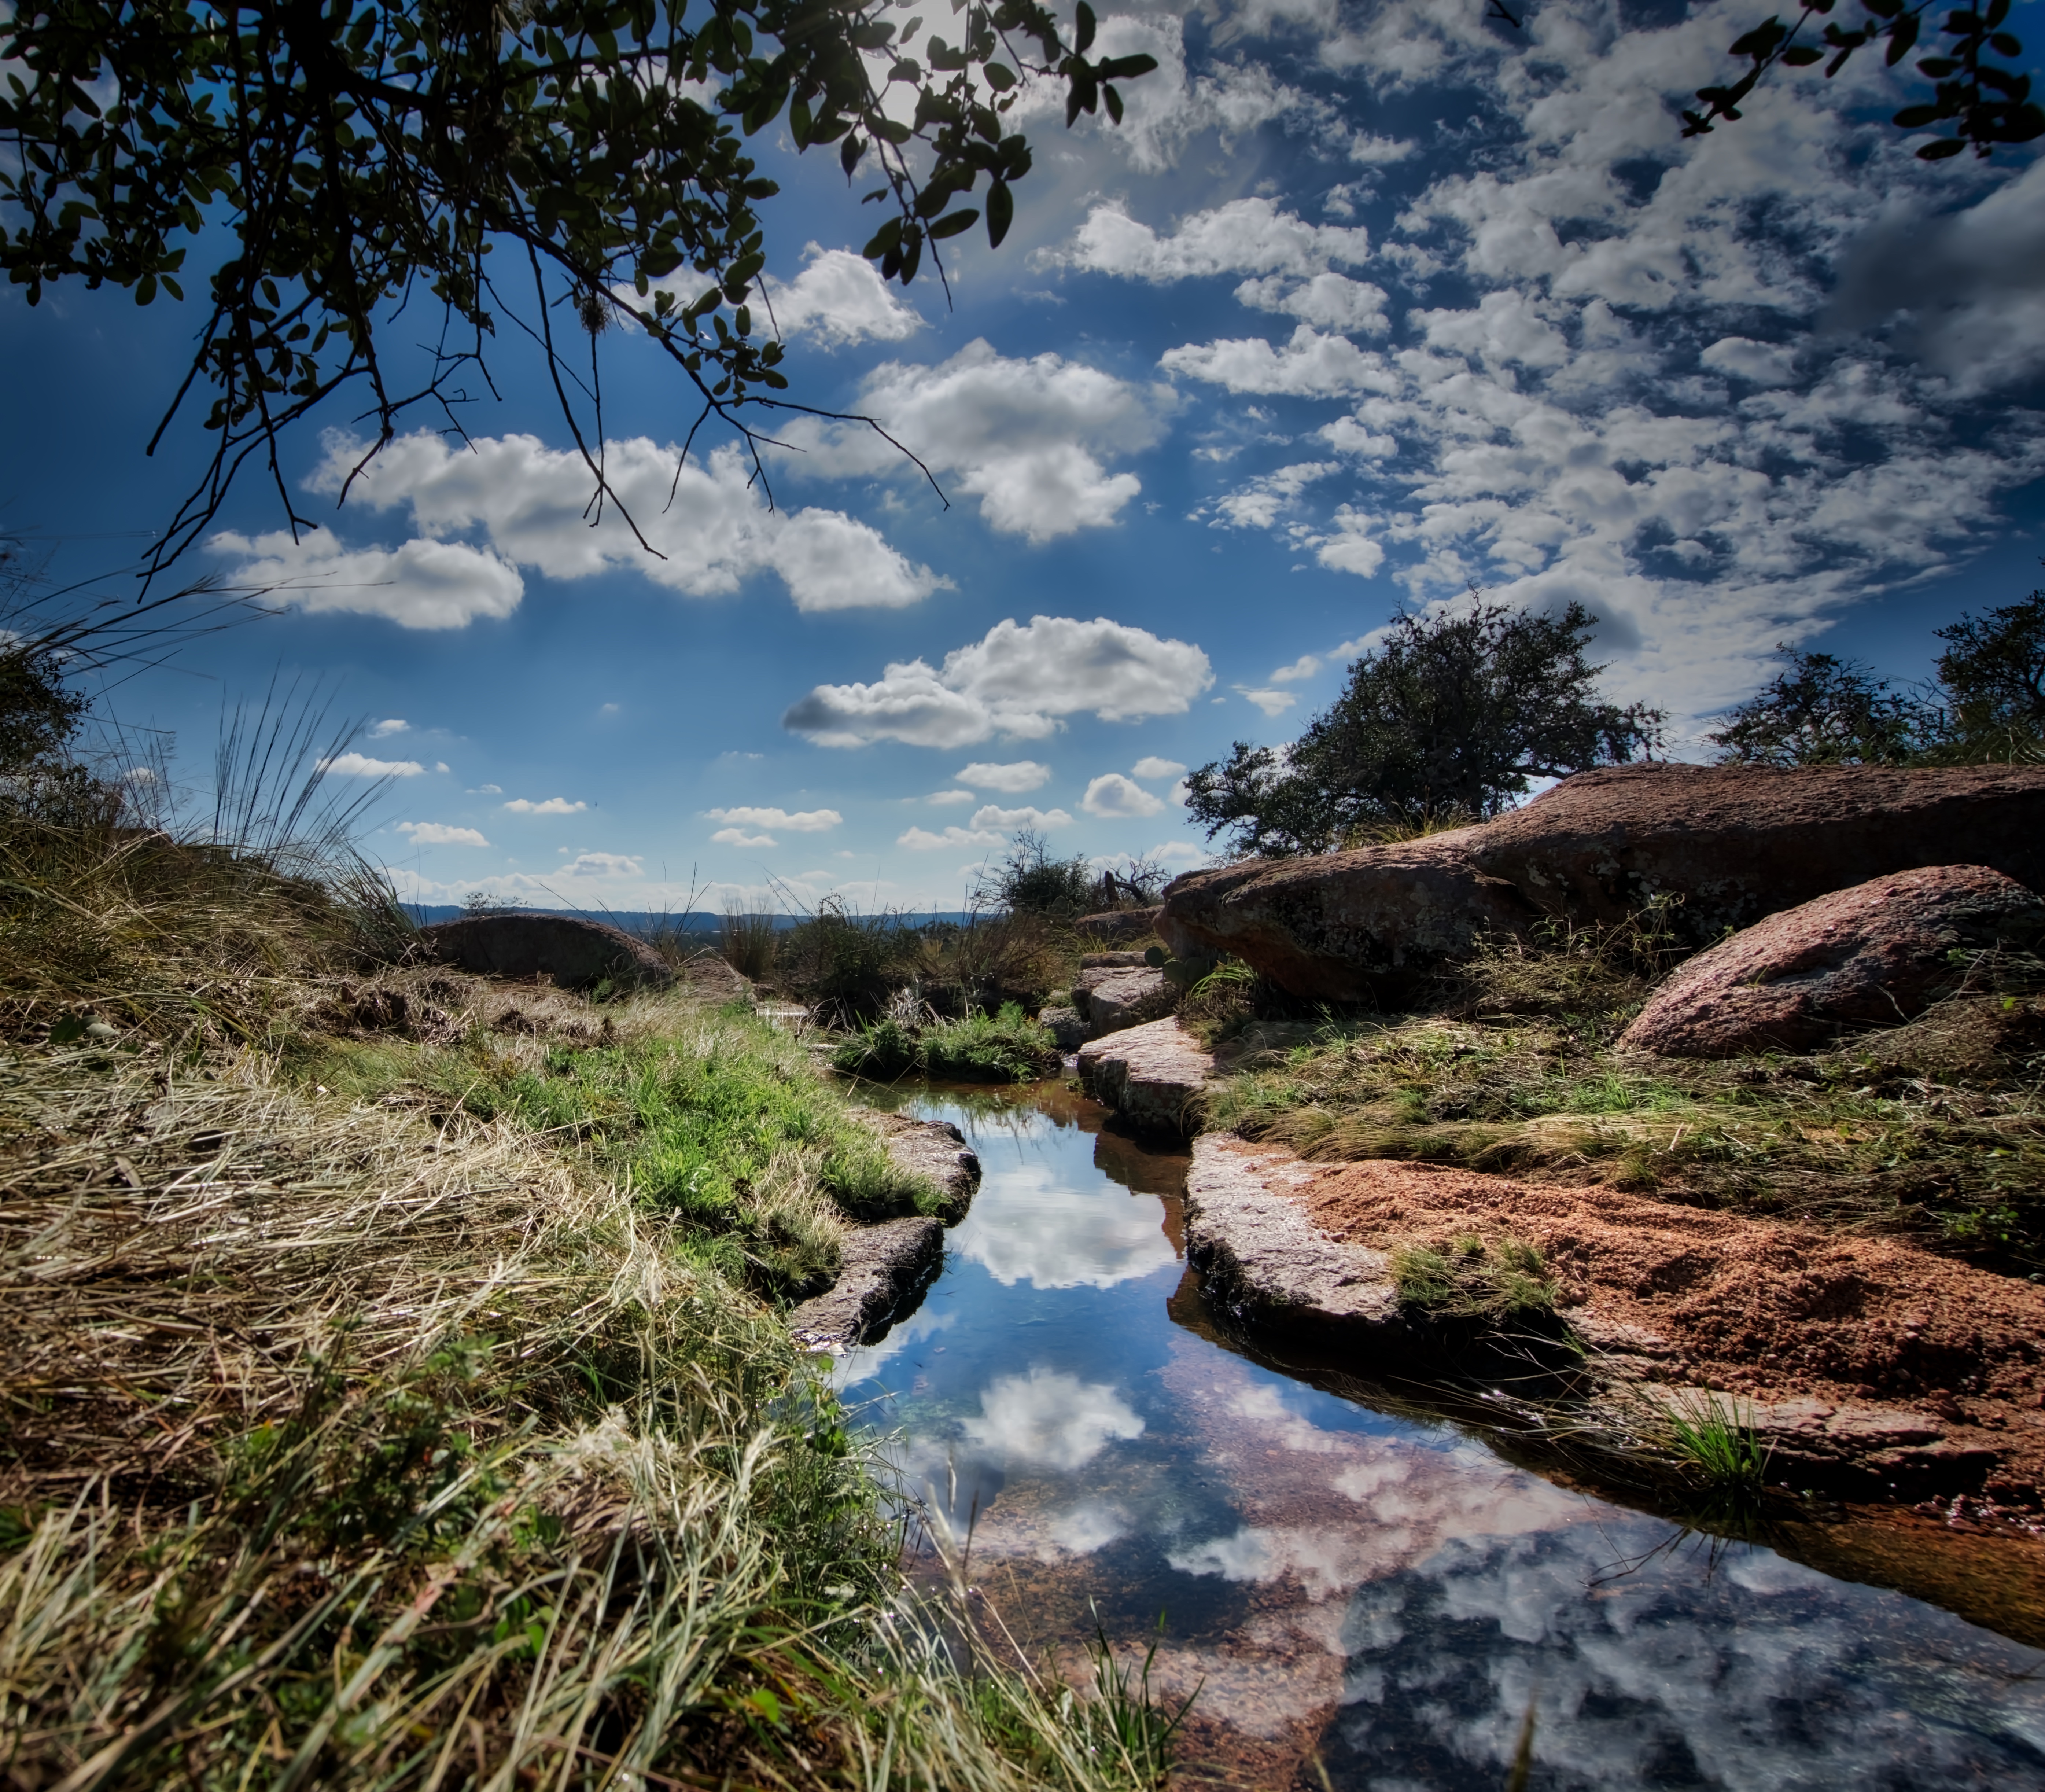 Enchanted Rock Stream, A7r, Clouds, Country, Enchanted, HQ Photo